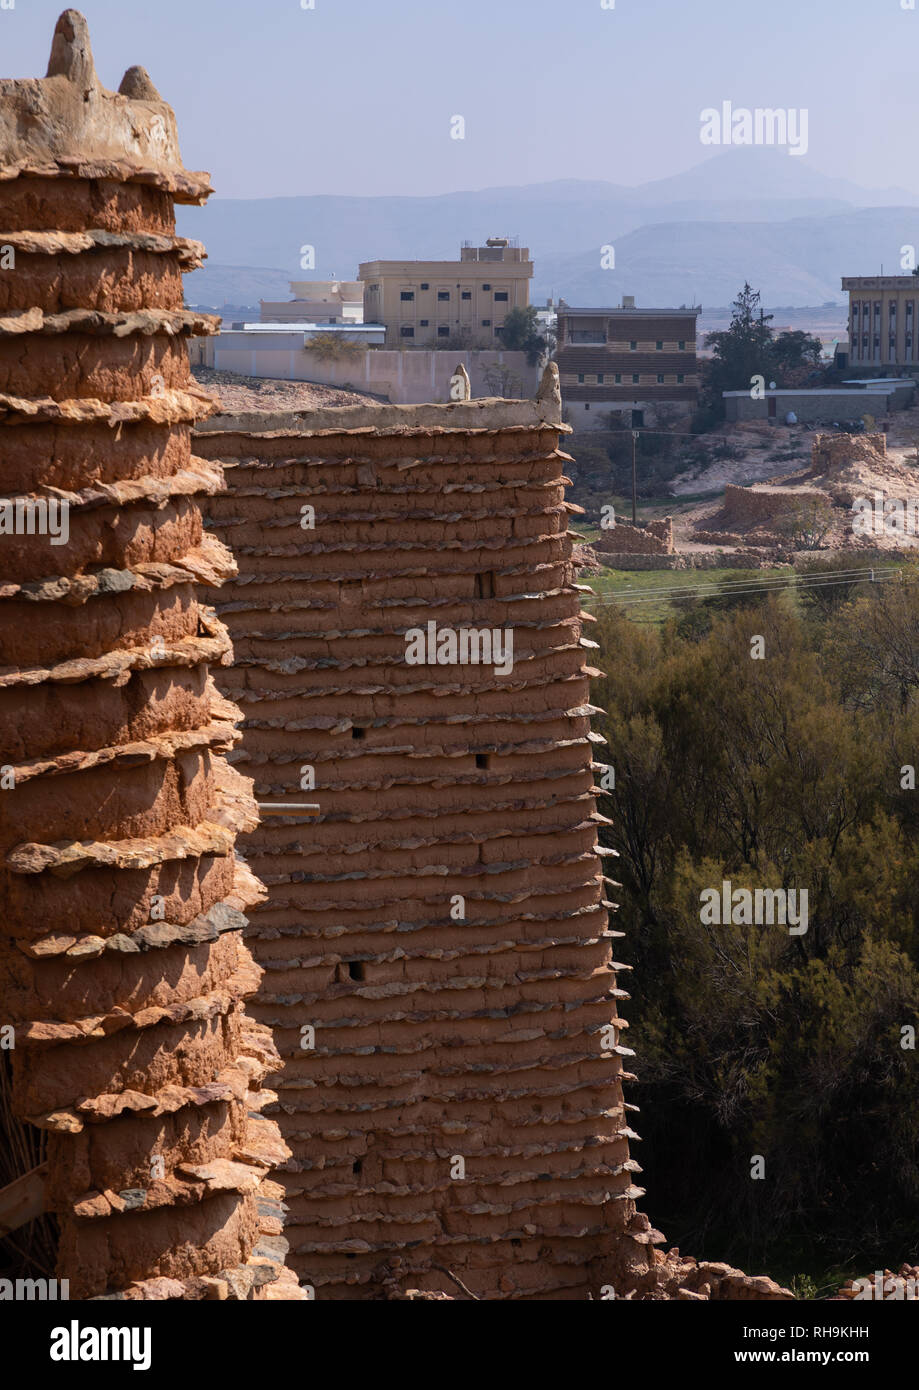 Aerial view of stone and mud watchtower with slates in a village, Asir province, Sarat Abidah, Saudi Arabia Stock Photo